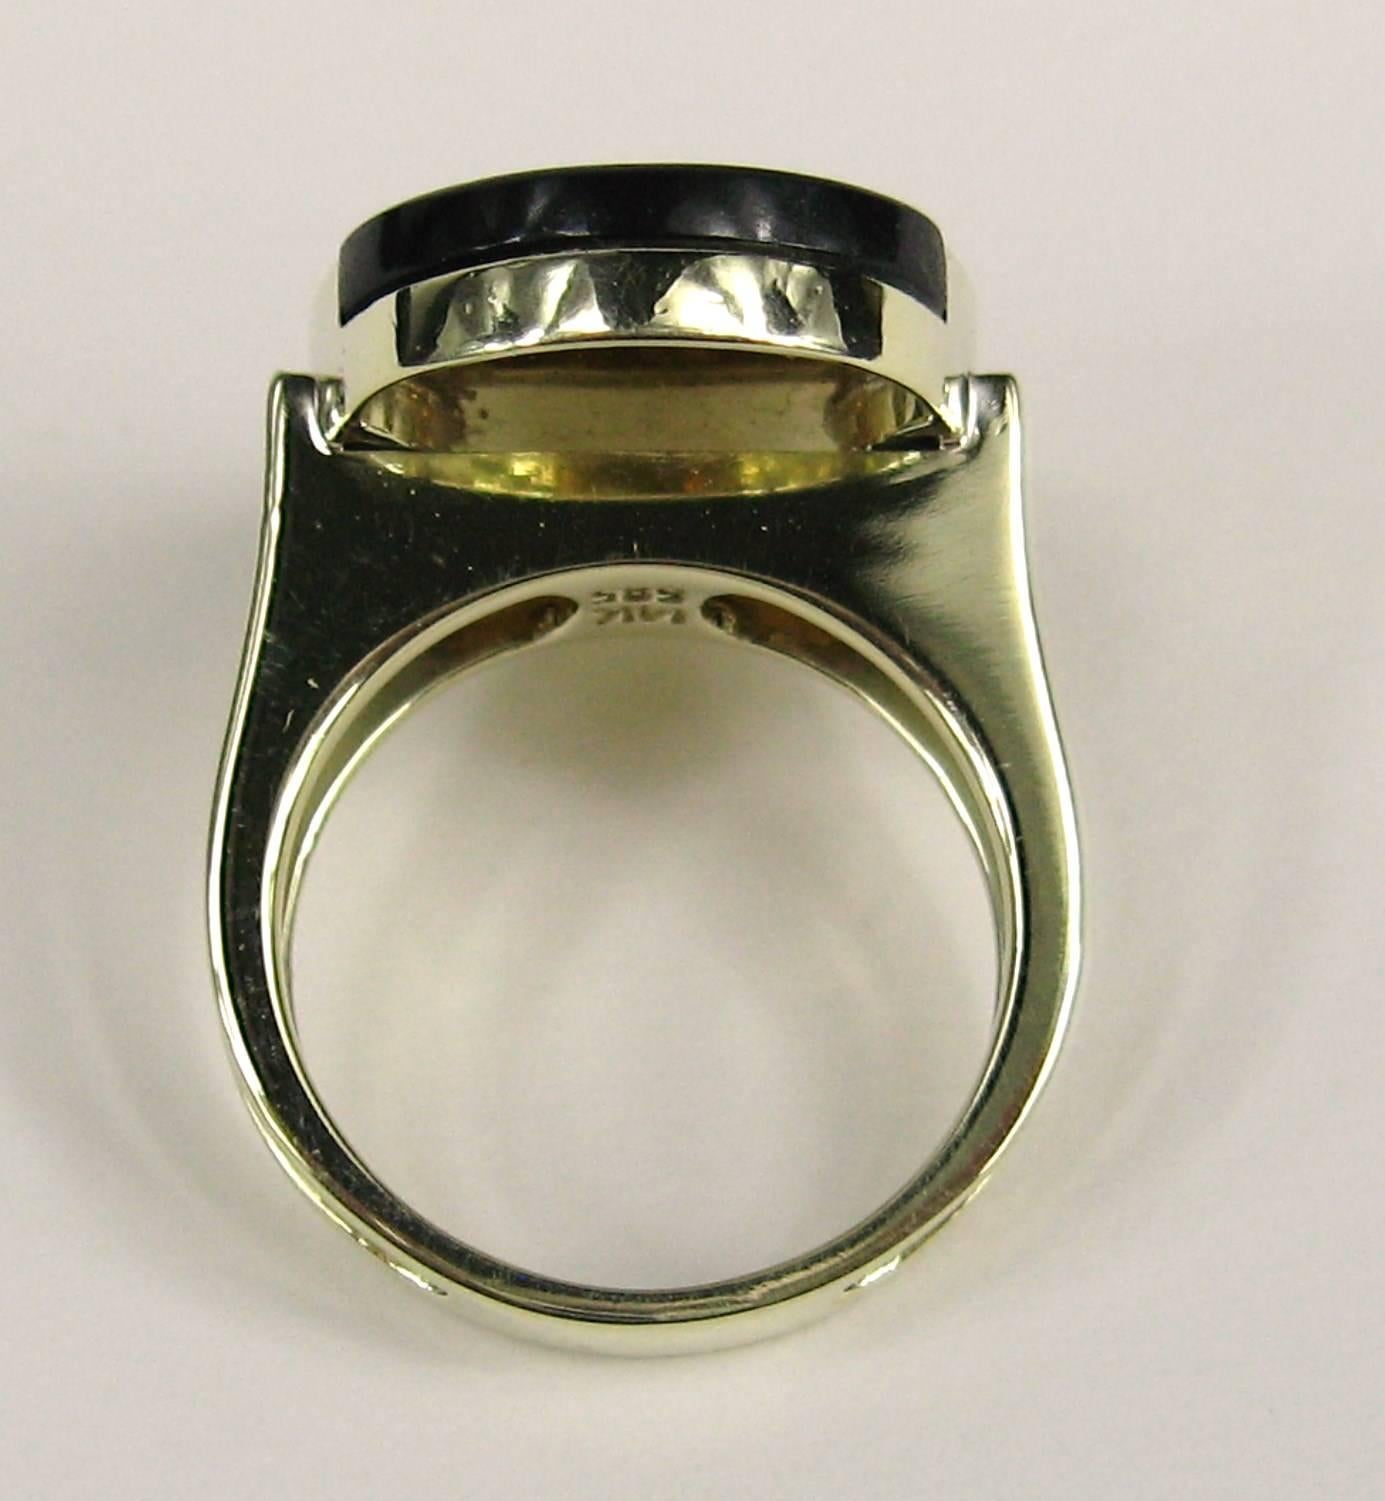 Modernist Black Onyx Diamond Ring 14 Karat In Good Condition For Sale In Wallkill, NY